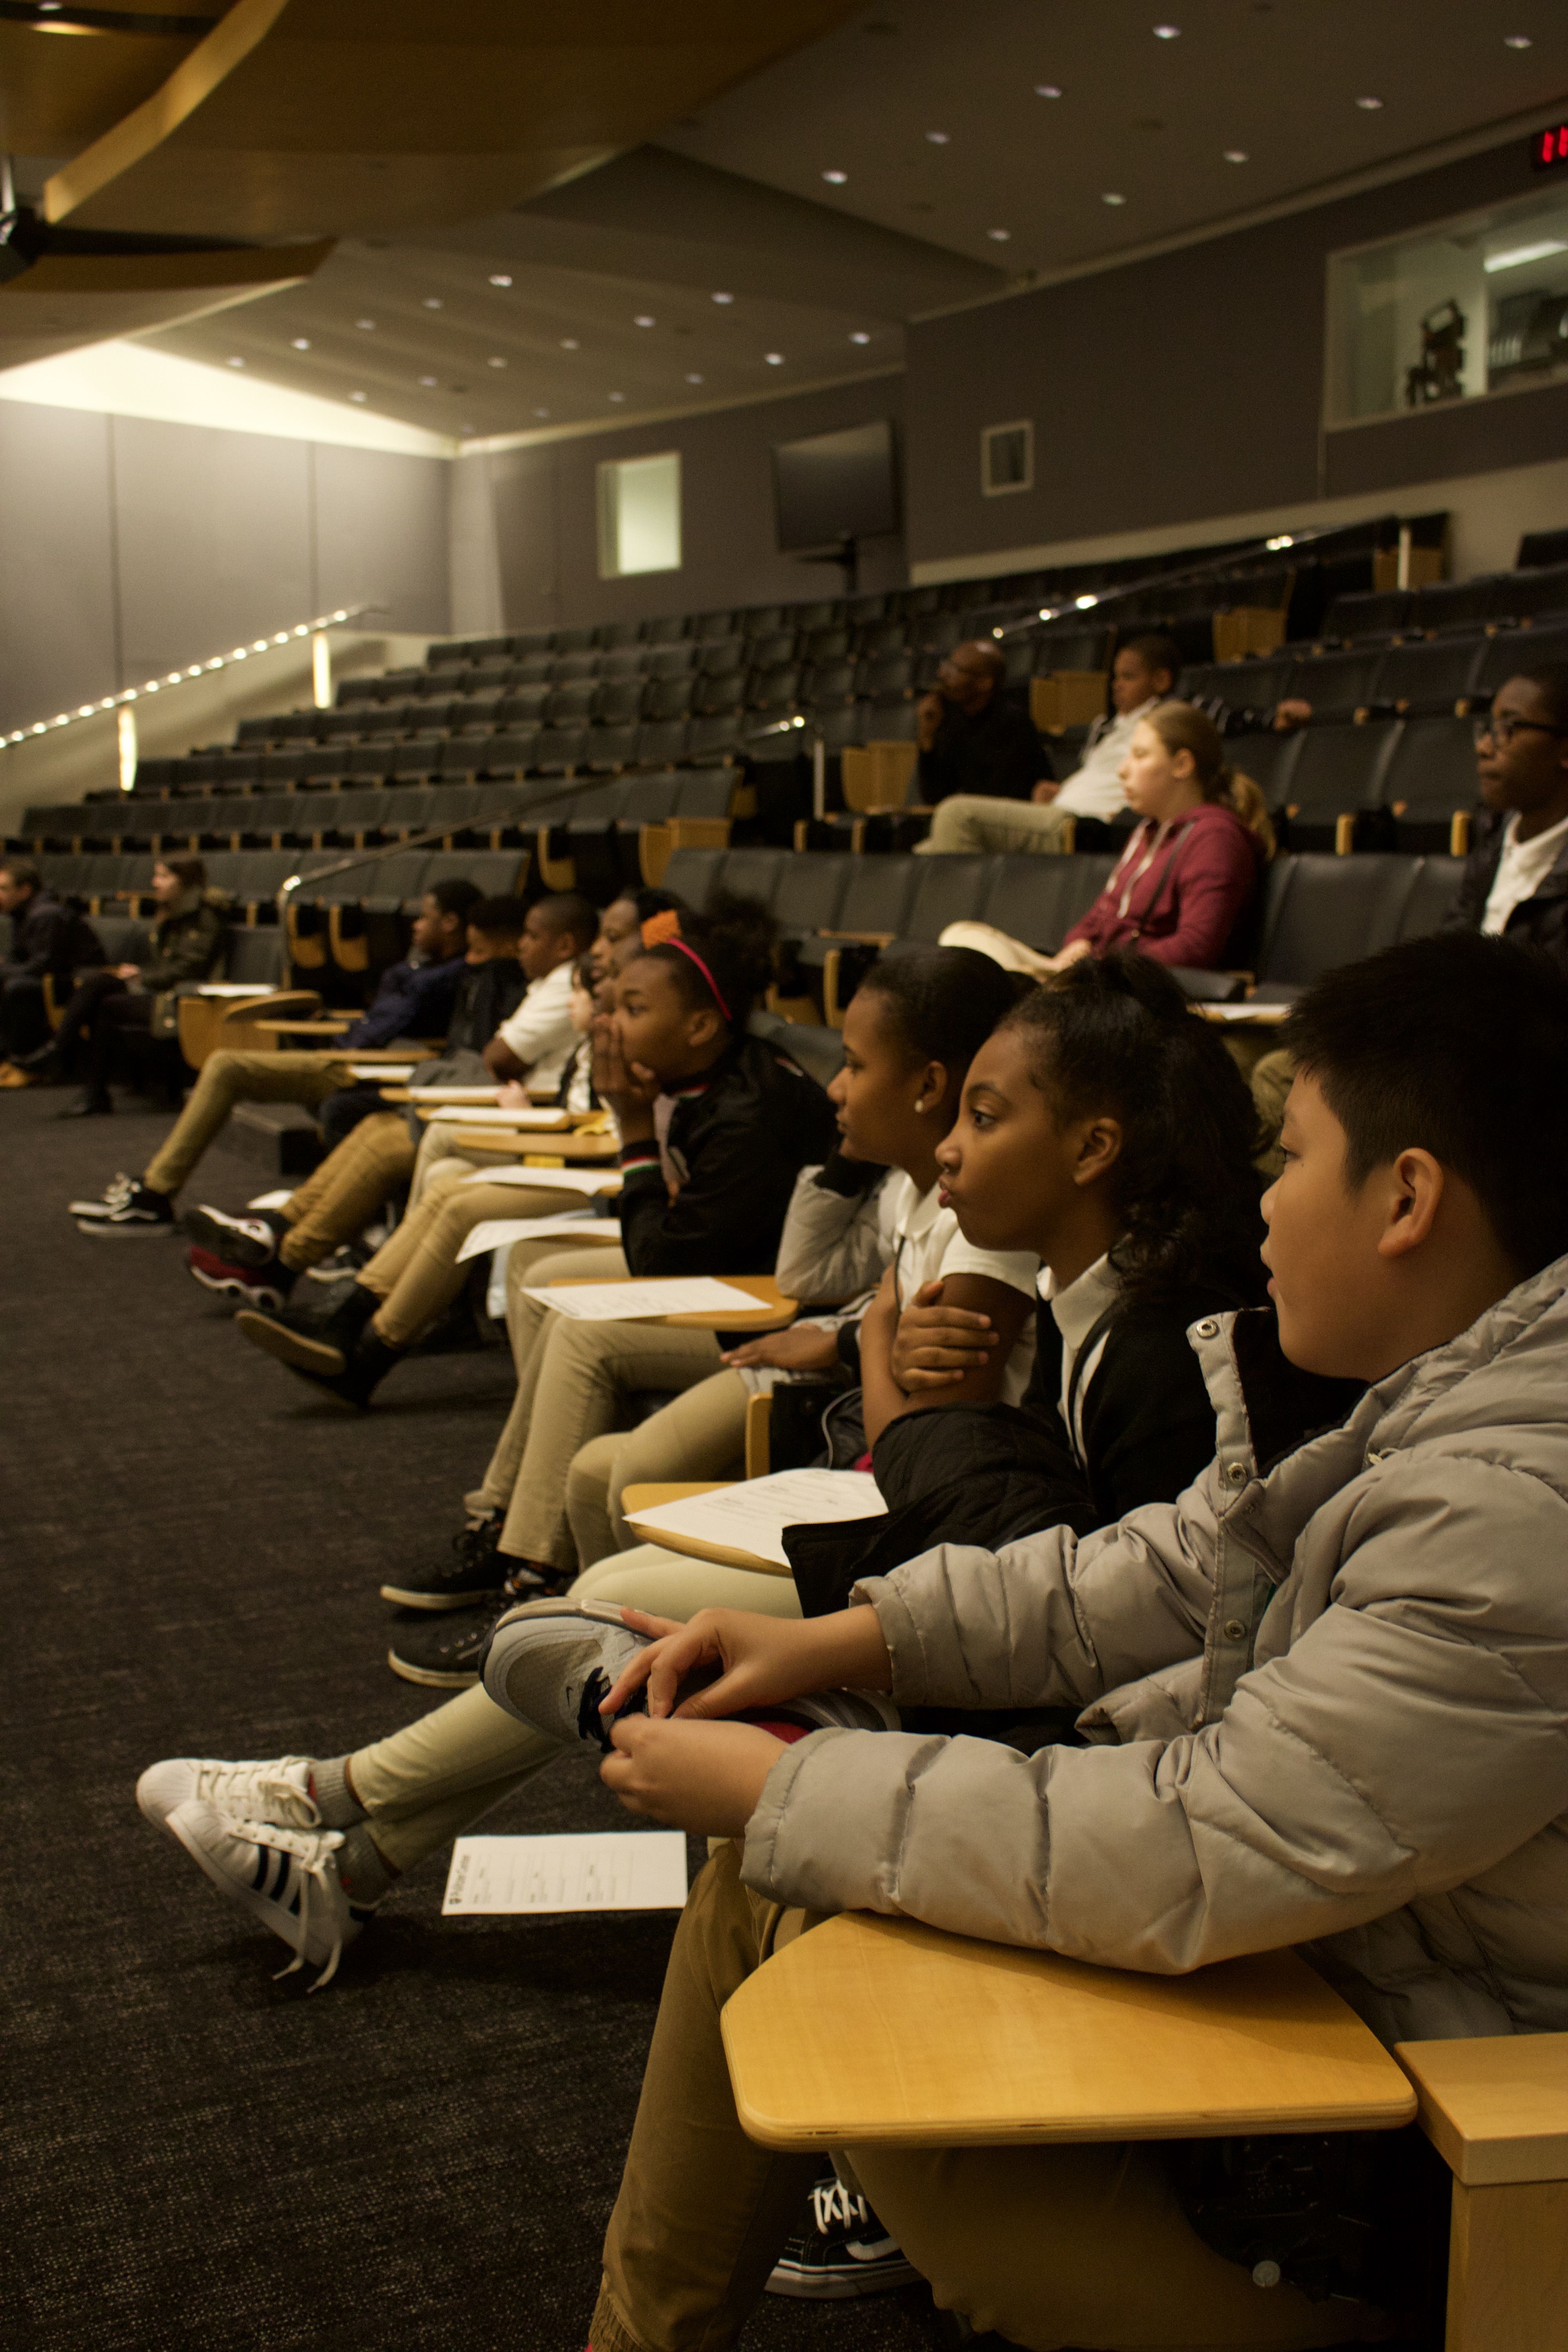 Students had a Q&A time with the panelists and journalists before and after the screening. Image by Alyssa Sperrazza. United States, 2018.